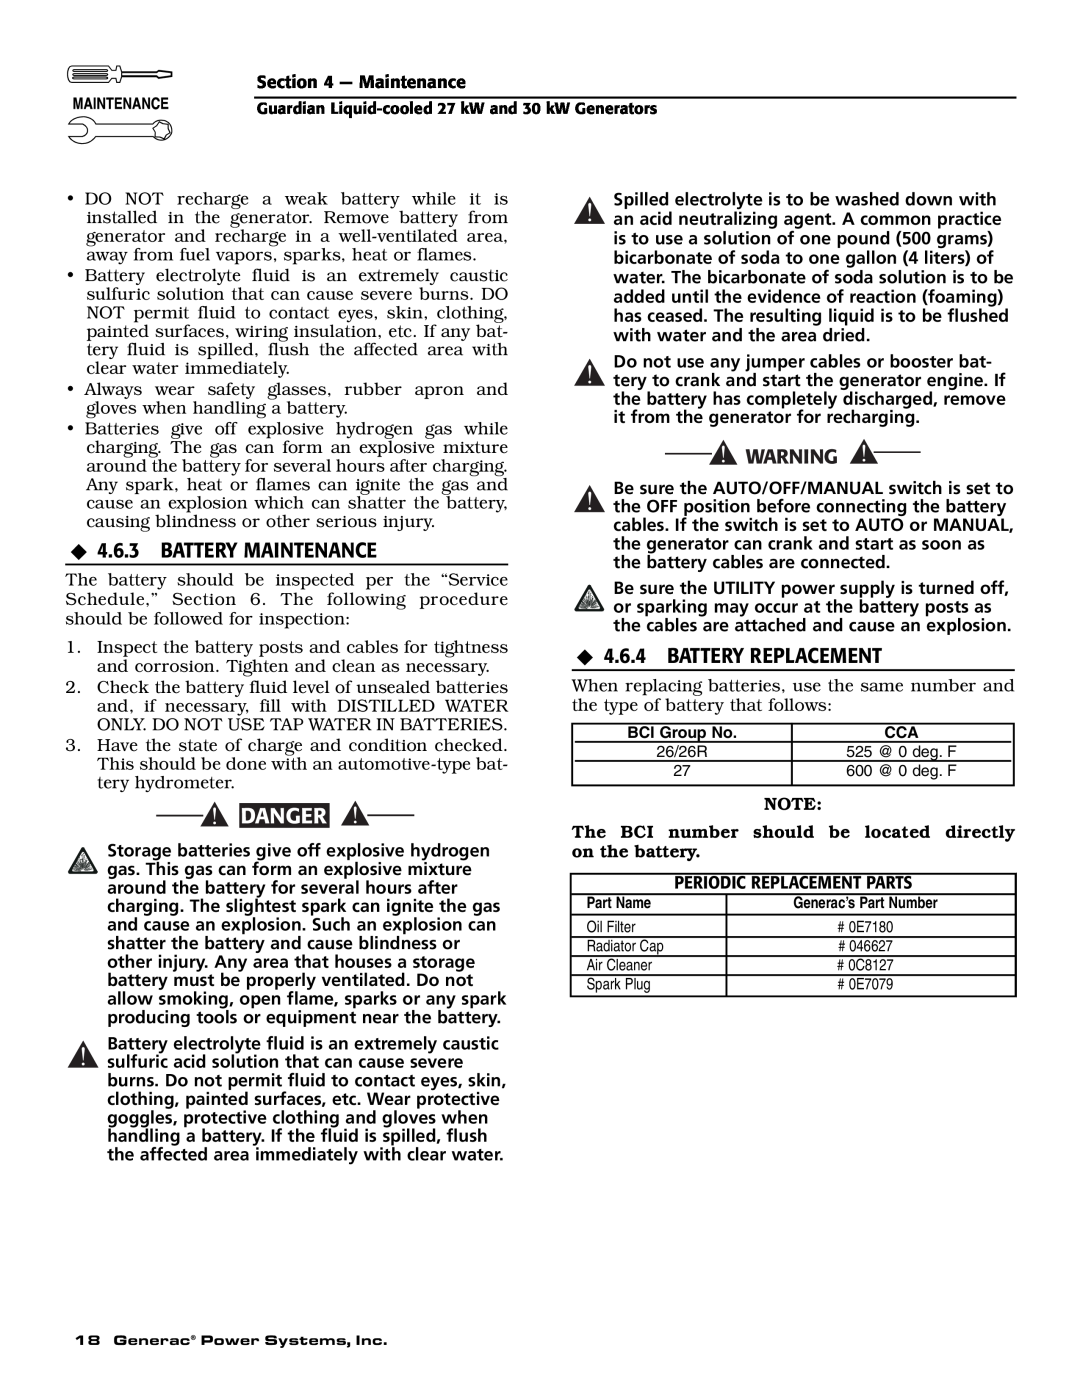 Generac Power Systems 004988-1 owner manual ‹4.6.3 BATTERY MAINTENANCE, ‹4.6.4 BATTERY REPLACEMENT, Danger 